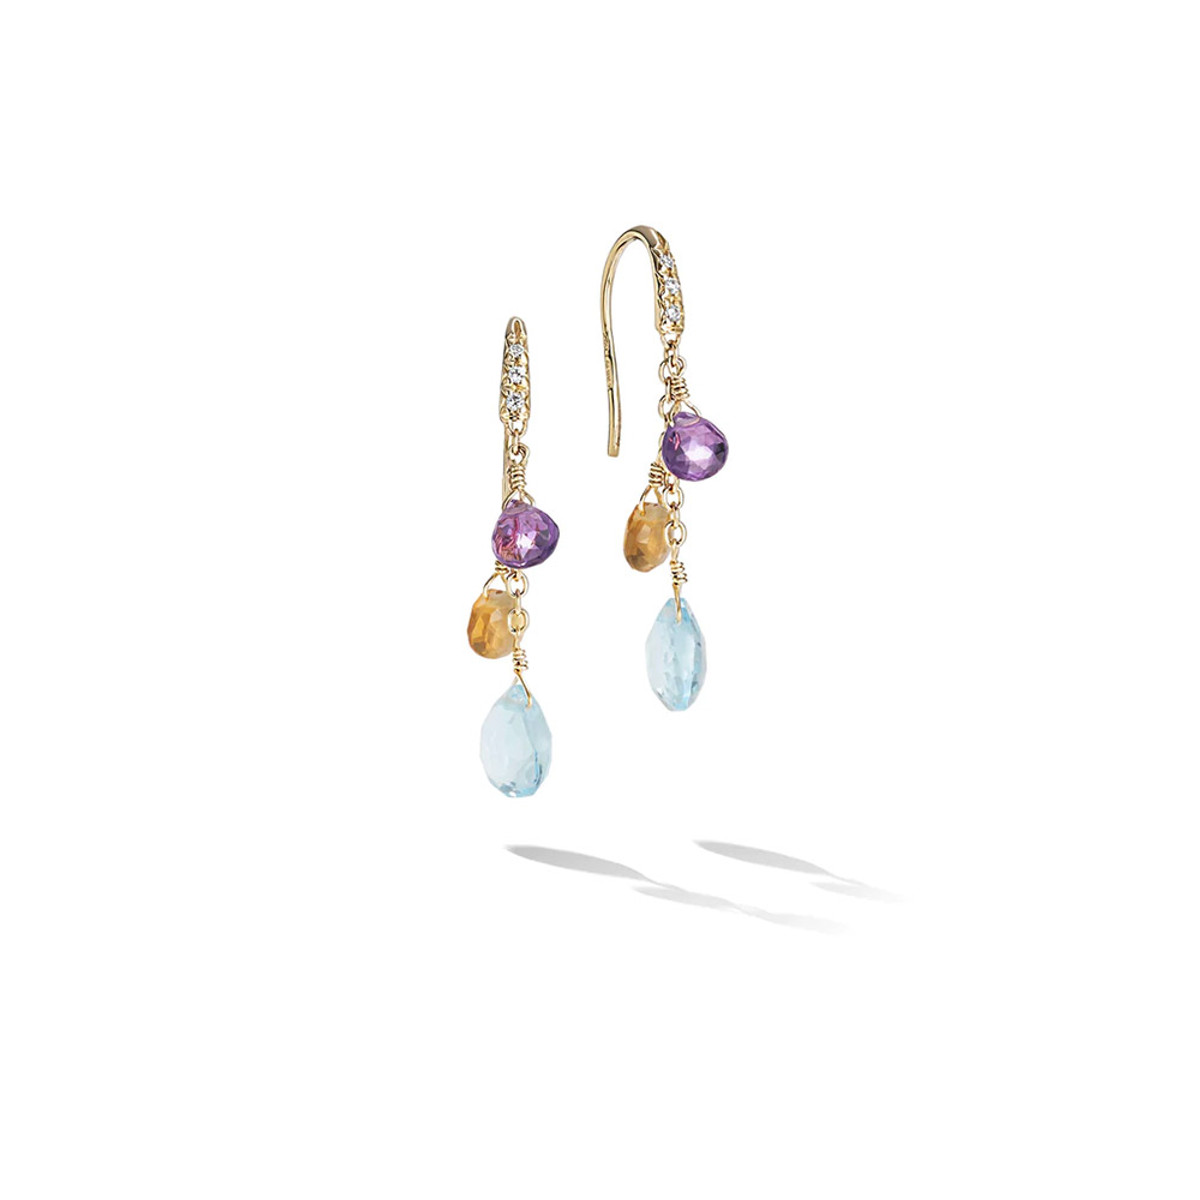 Marco Bicego Paradise 18K Yellow Gold Gemstone Earrings With Diamonds, Blue Topaz Accents-54721